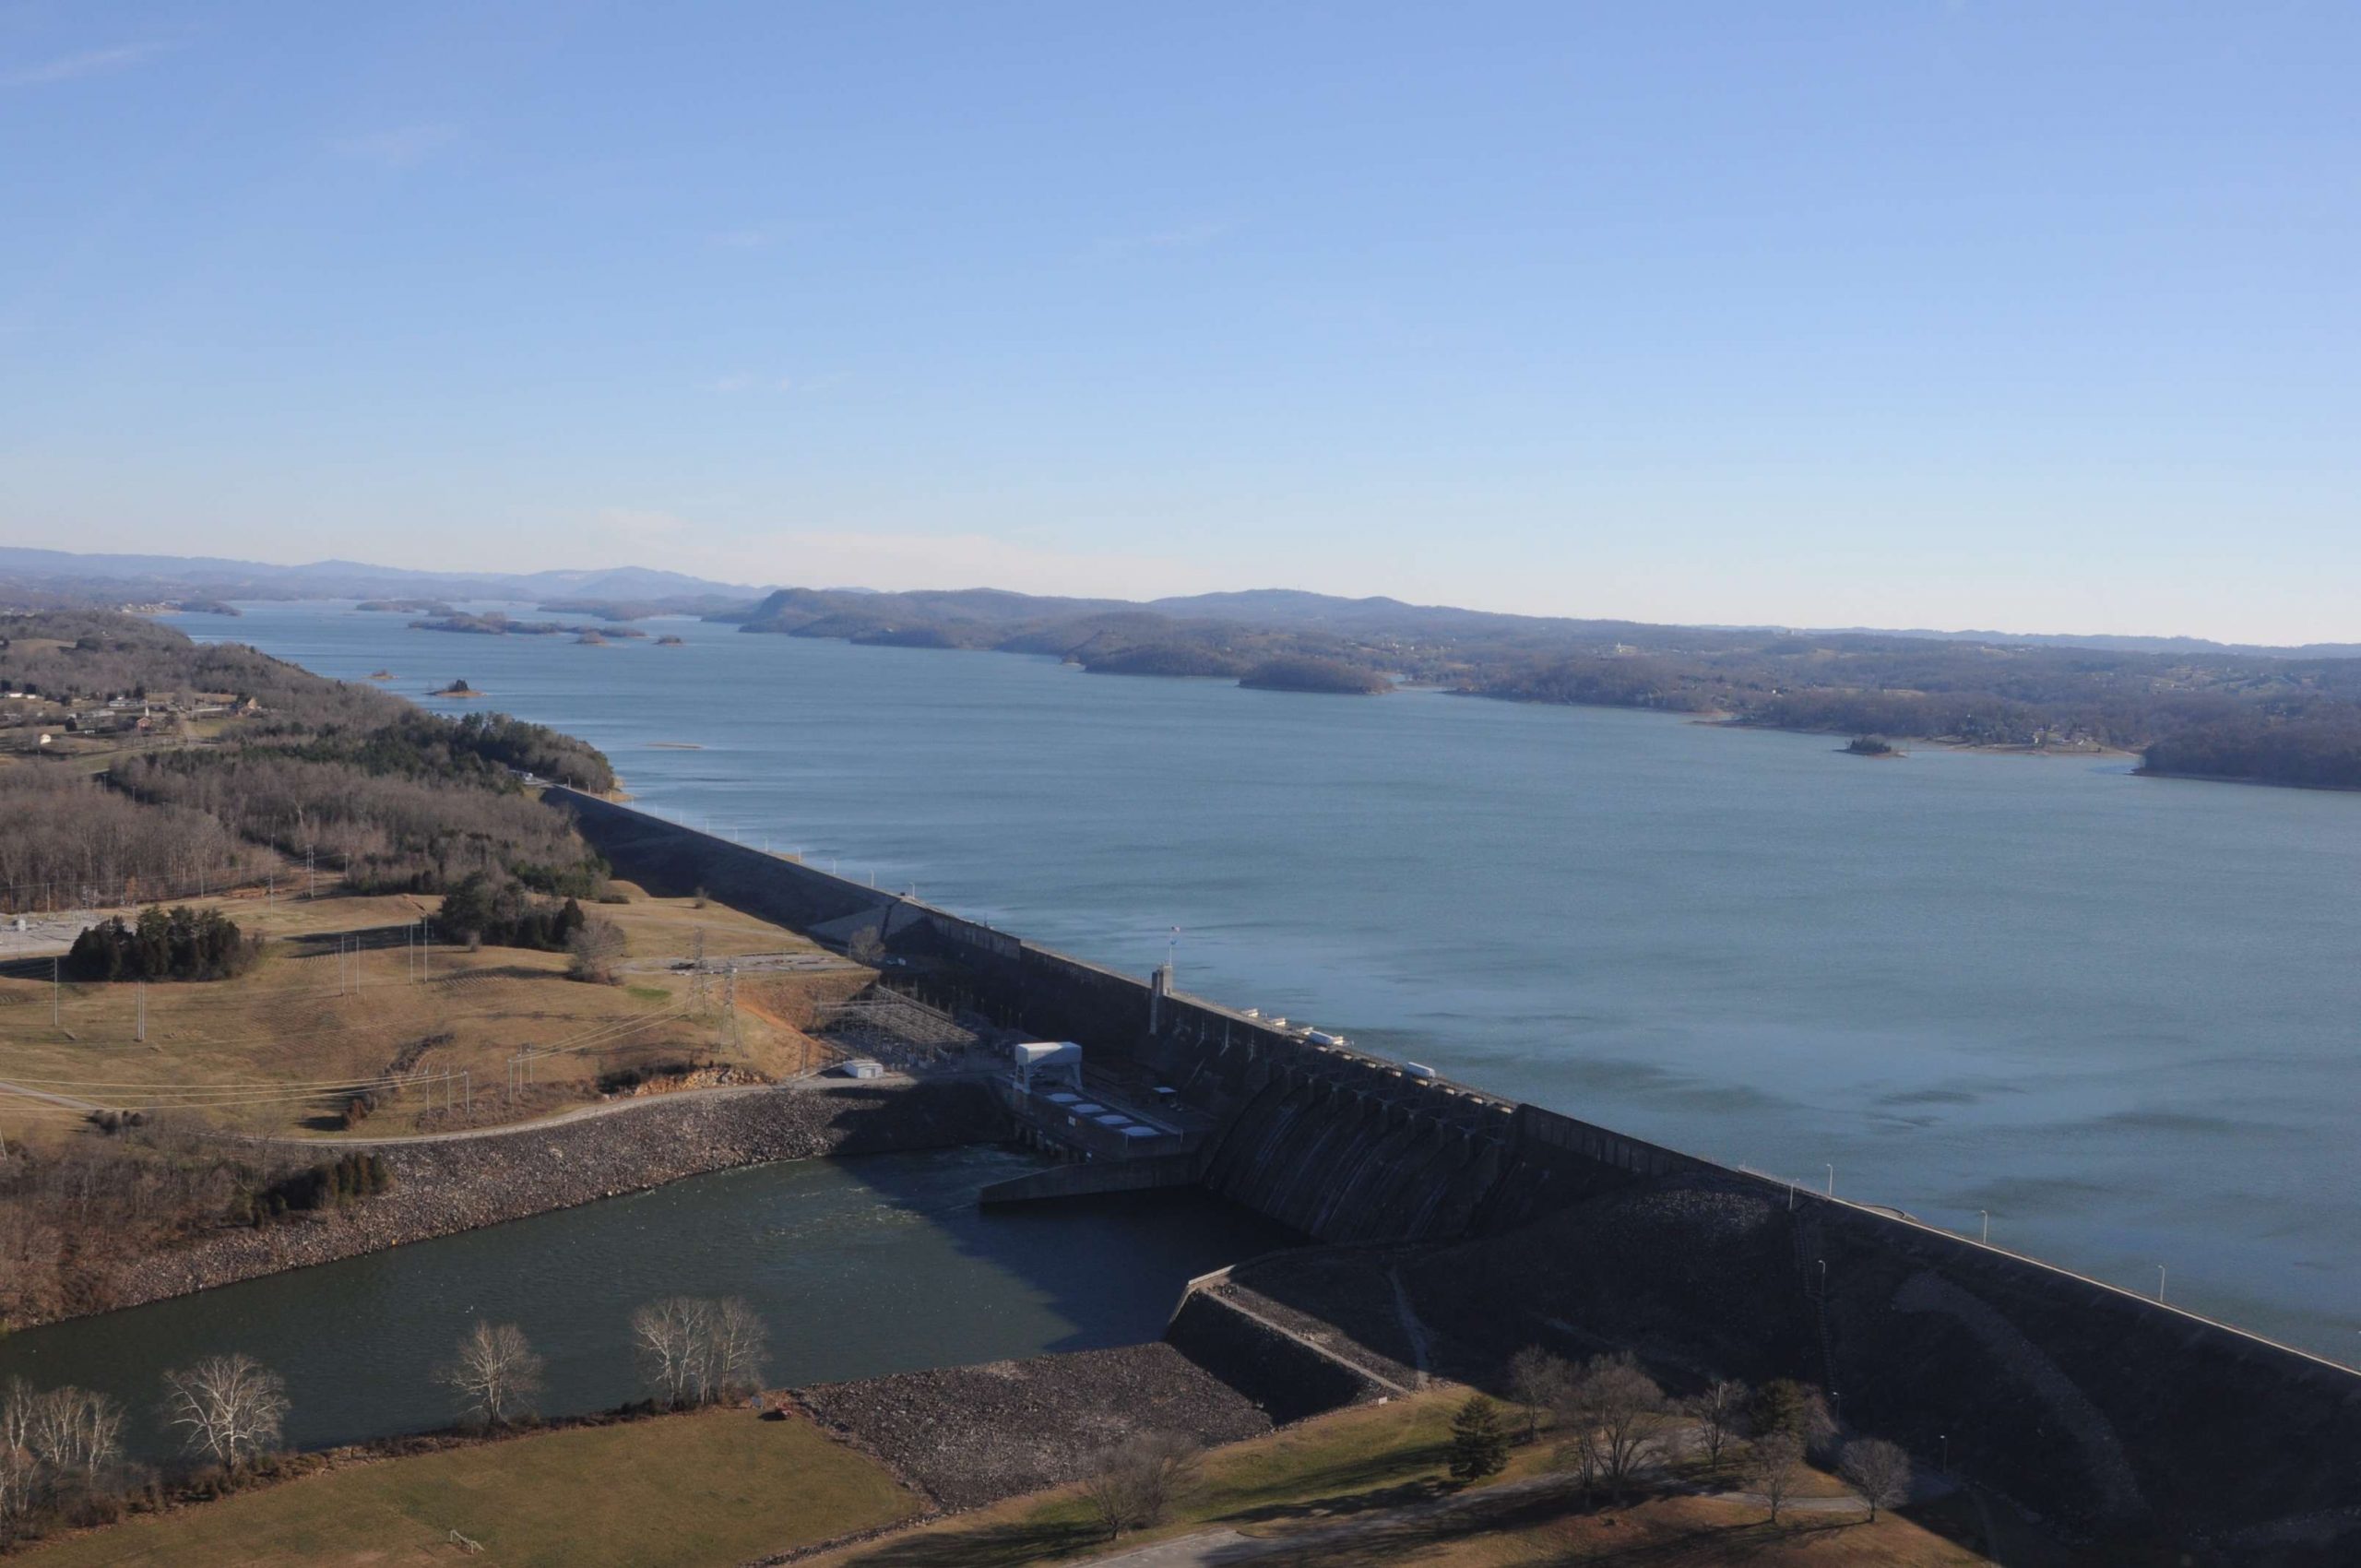 Built to help generate power for the World War II emergency, Cherokee Dam also plays an important role in flood control. The Tennessee Valley Authority constructed the 6,760-foot-long, 175-foot-high dam on the Holston River that flows out of the Appalachians. 